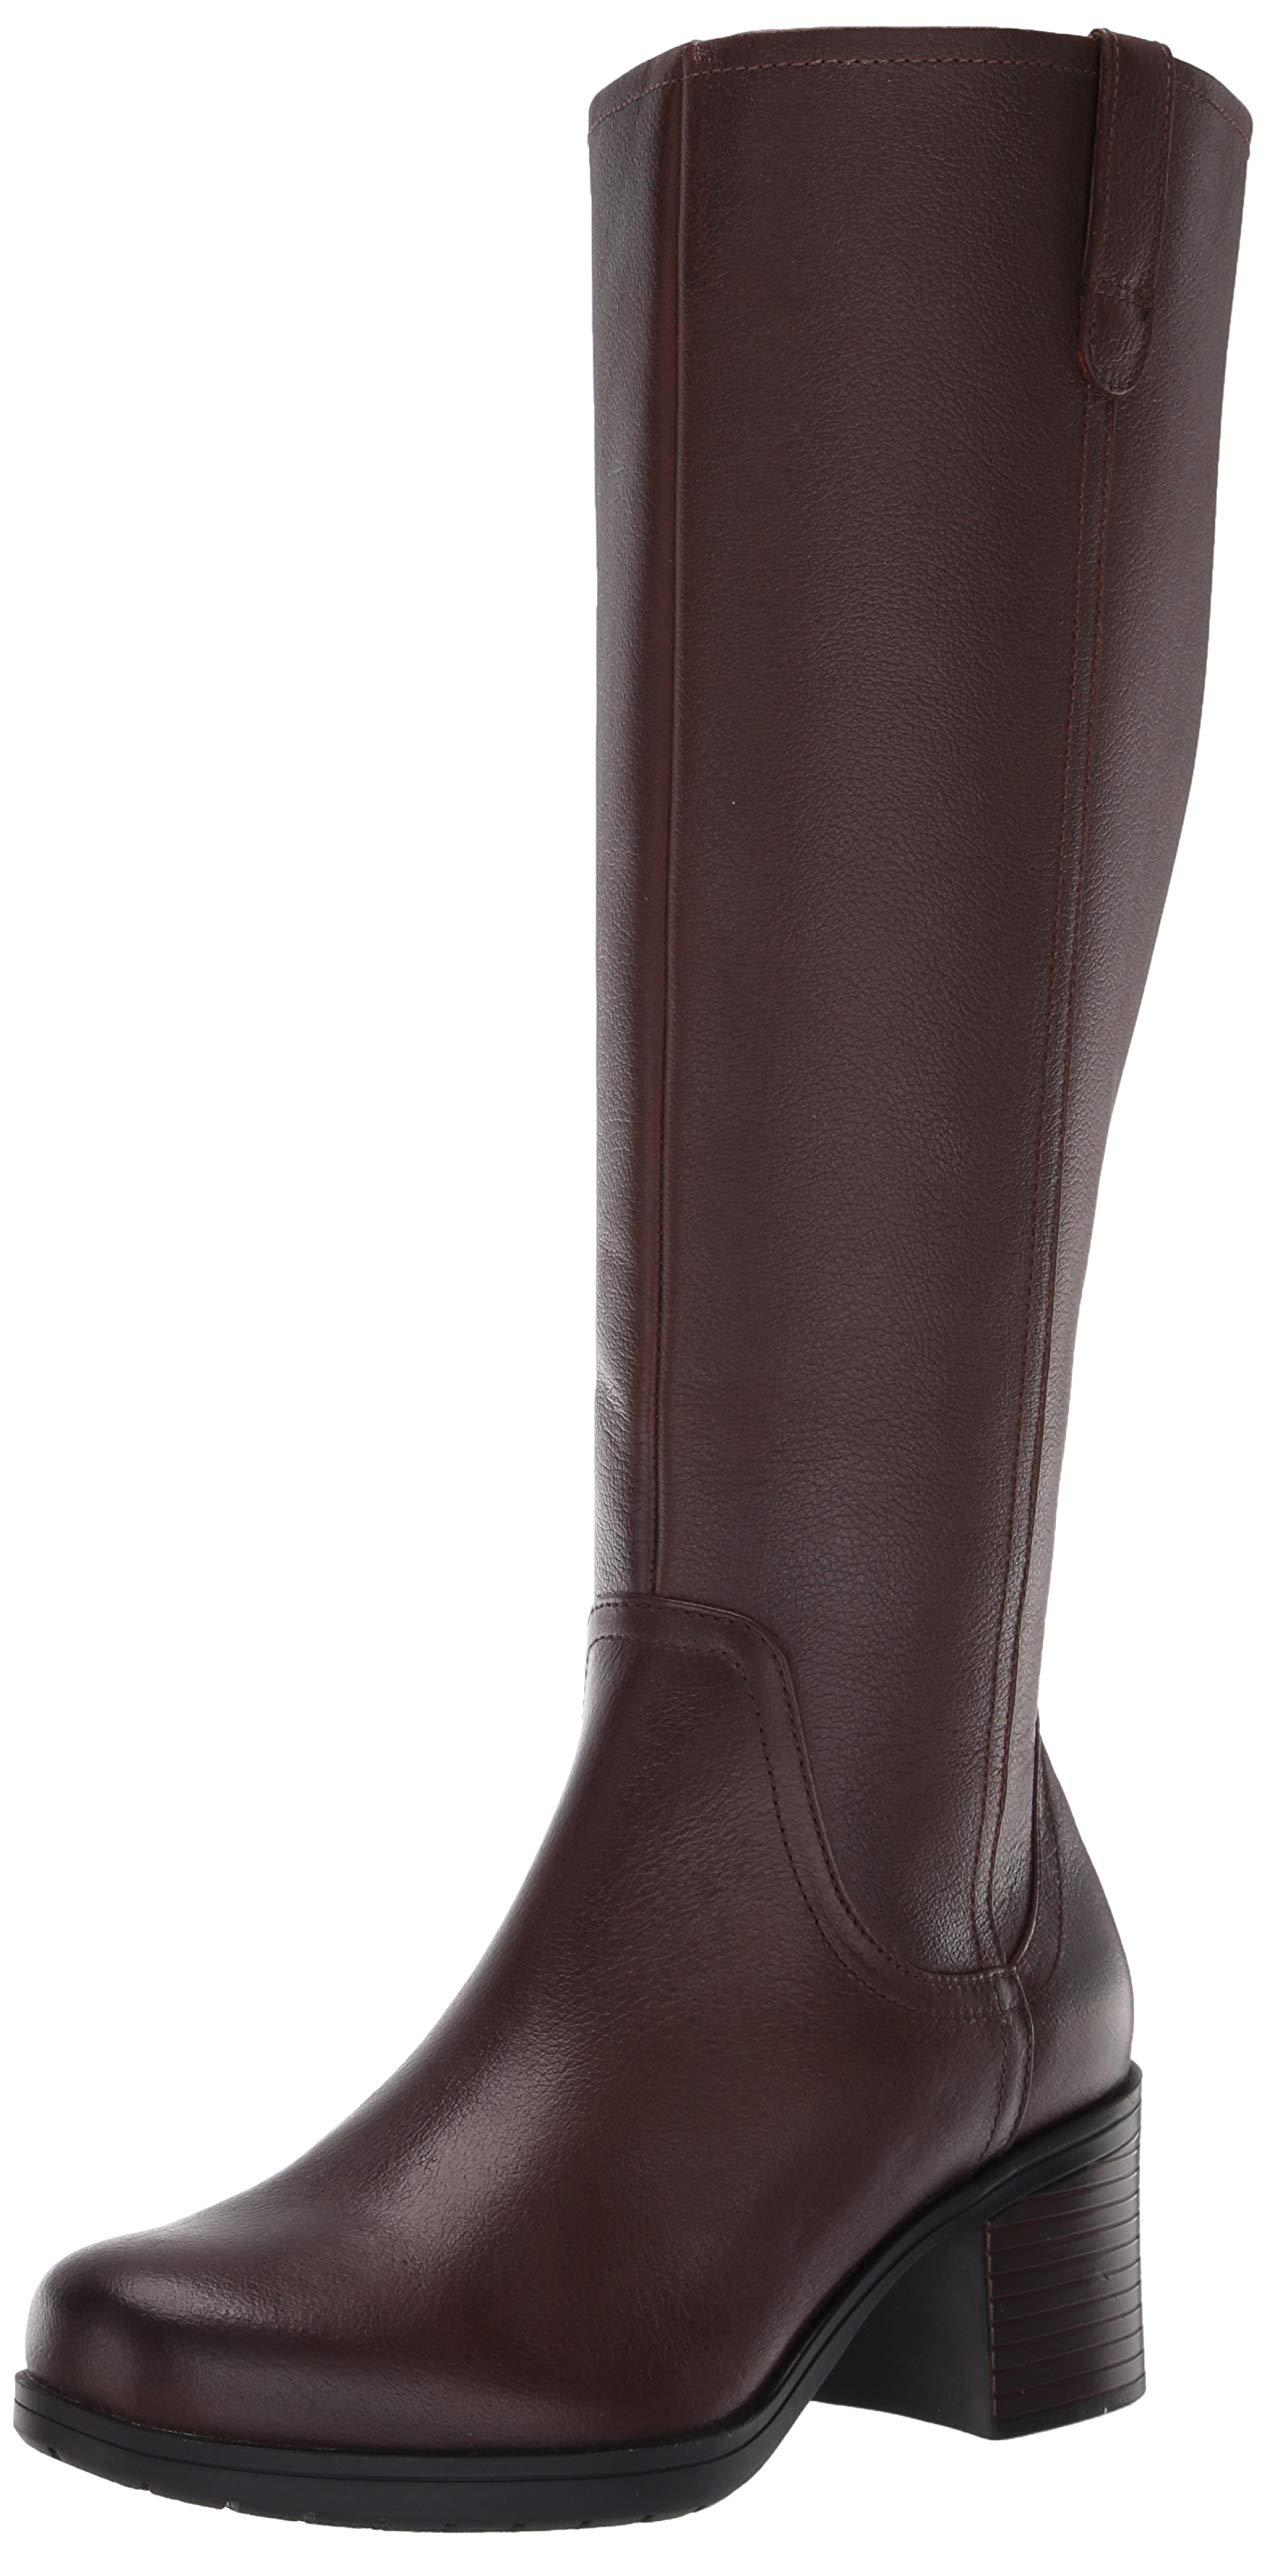 Clarks Rubber Hollis Moon Ws Knee High Boot in Mahogany Leather (Brown) |  Lyst